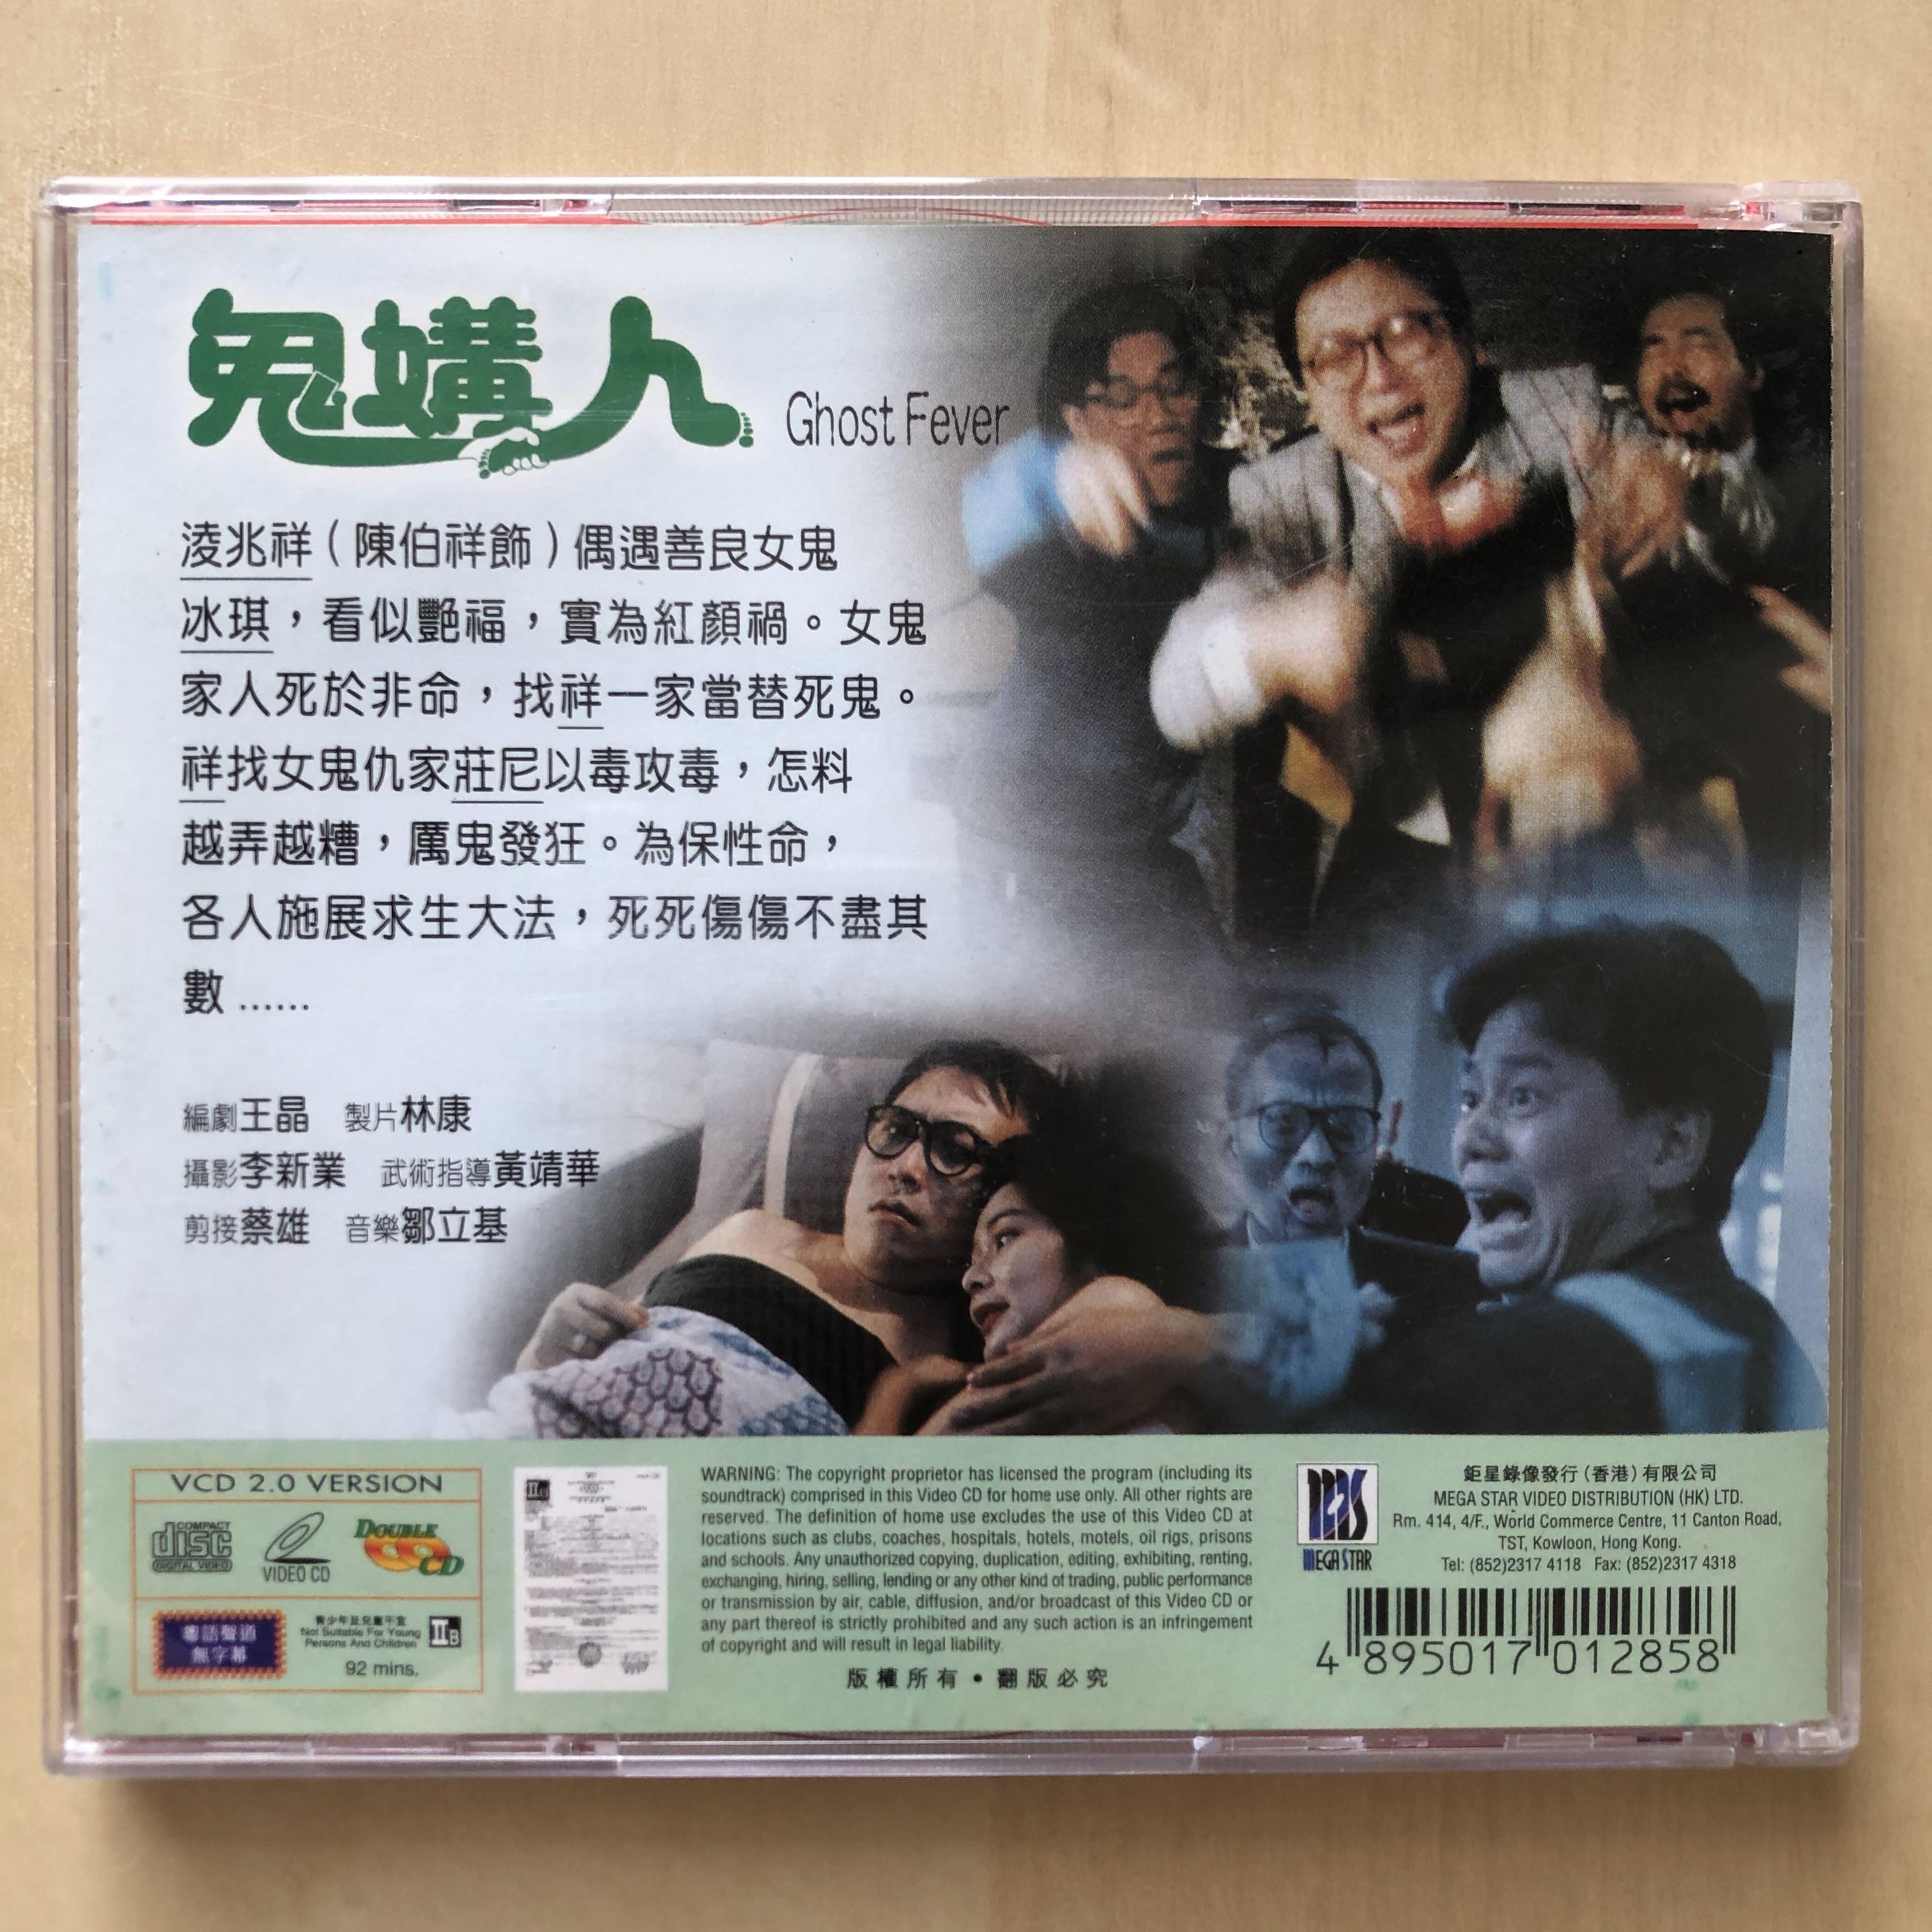 VCD丨鬼媾人/ Ghost Fever 電影(2VCD), 興趣及遊戲, 音樂、樂器& 配件 